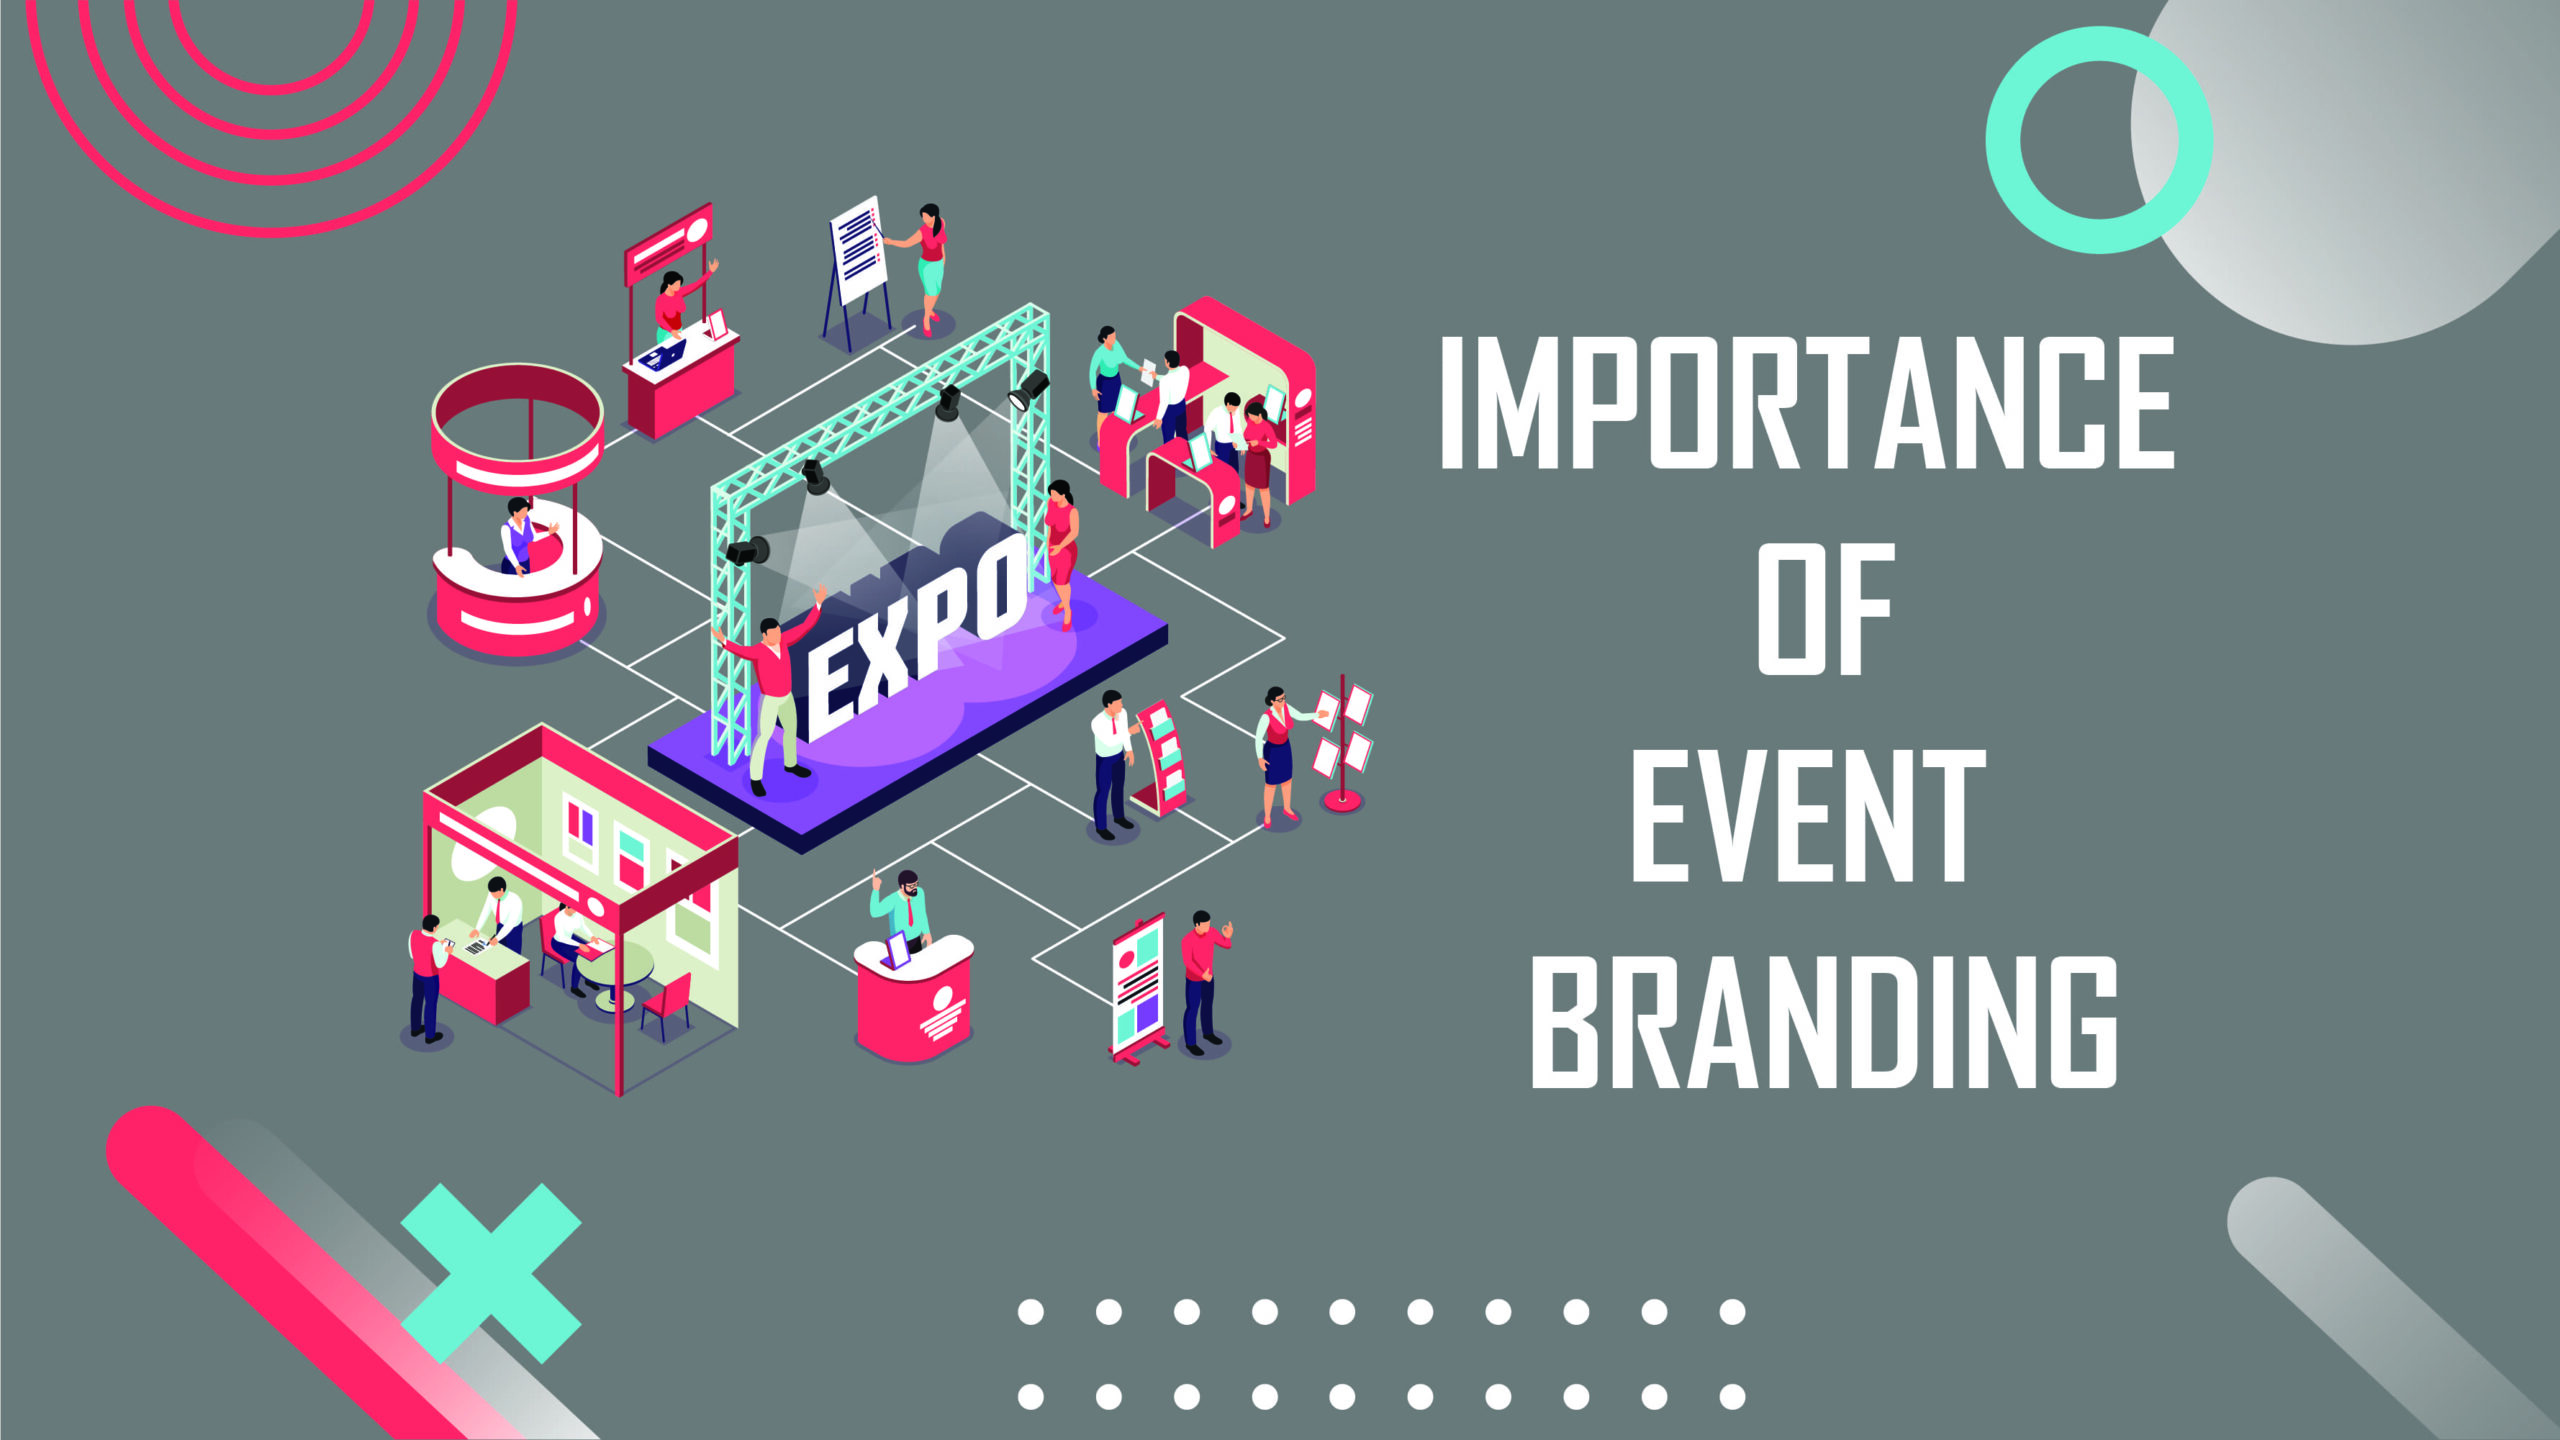 Importance of Event Branding